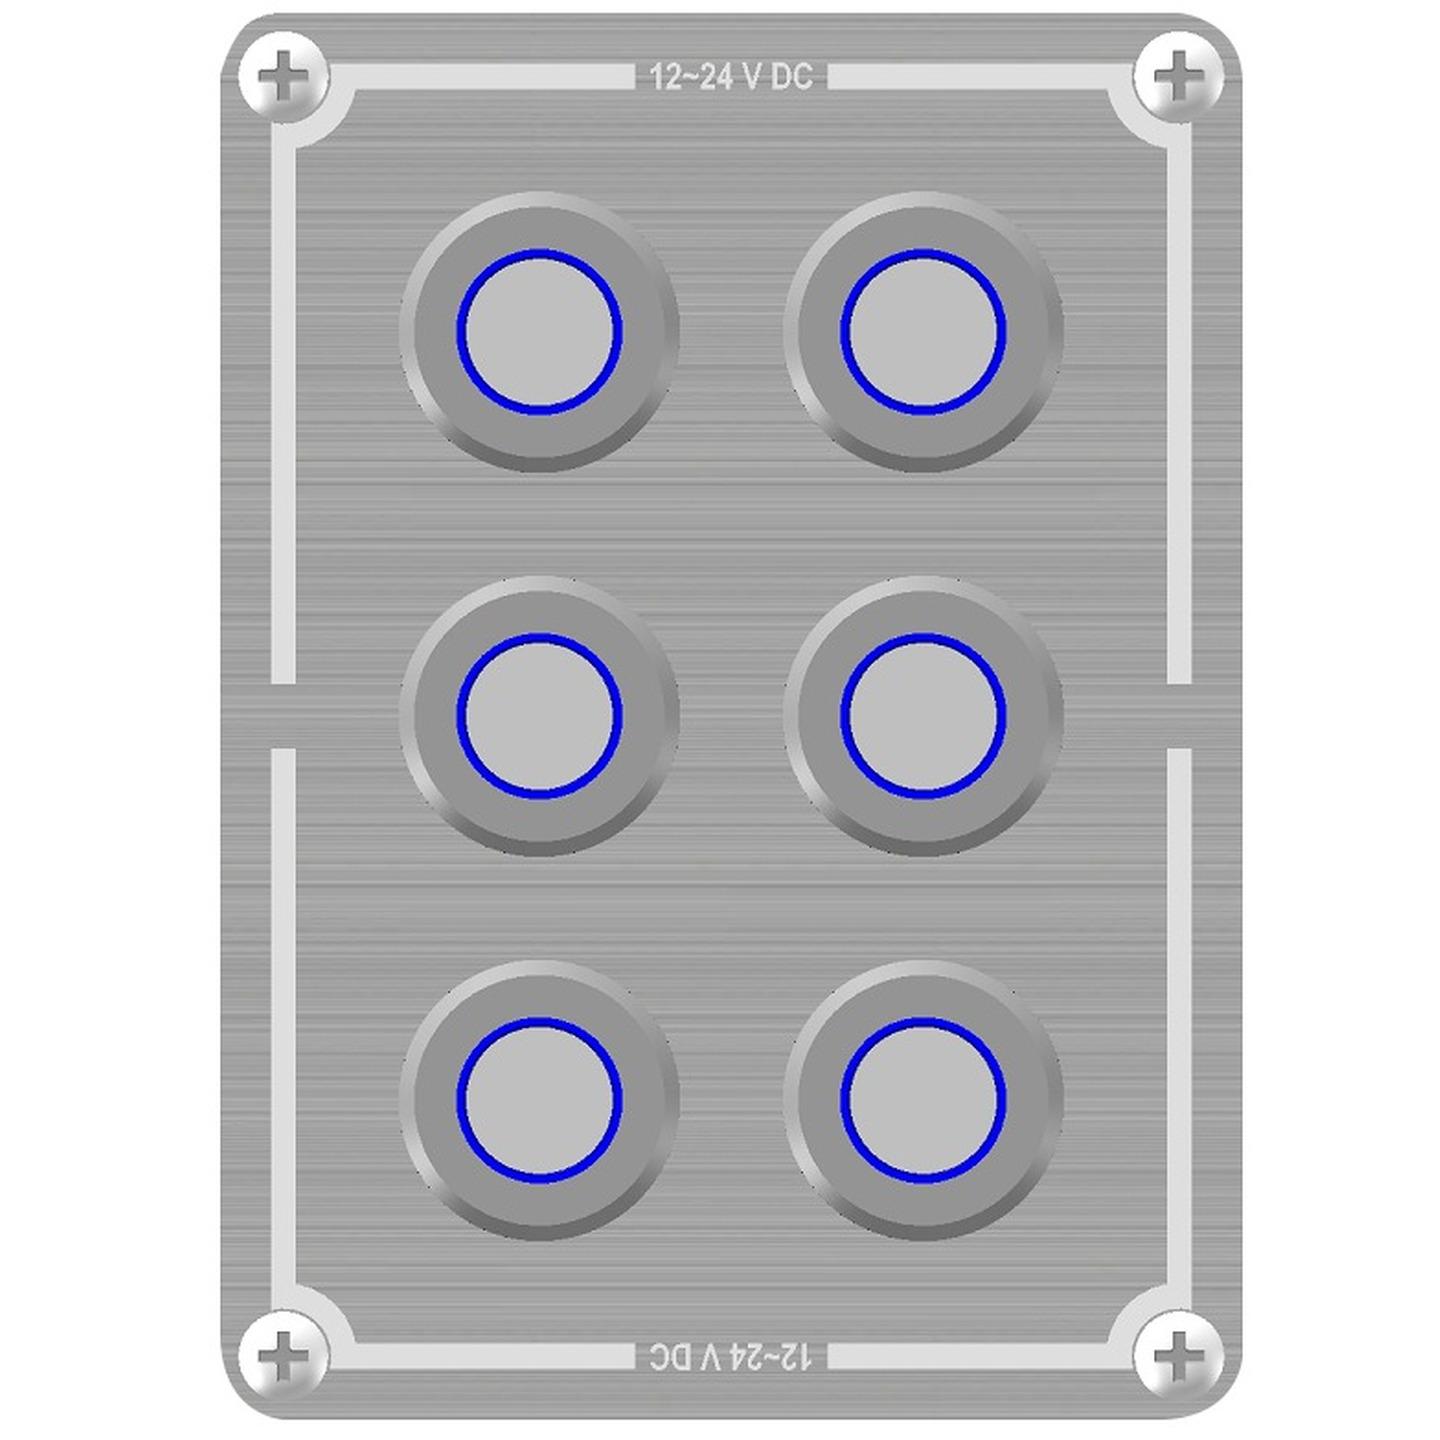 Powertech 6 Way Stainless Steel Switch Panel With Blue Illuminated Switches